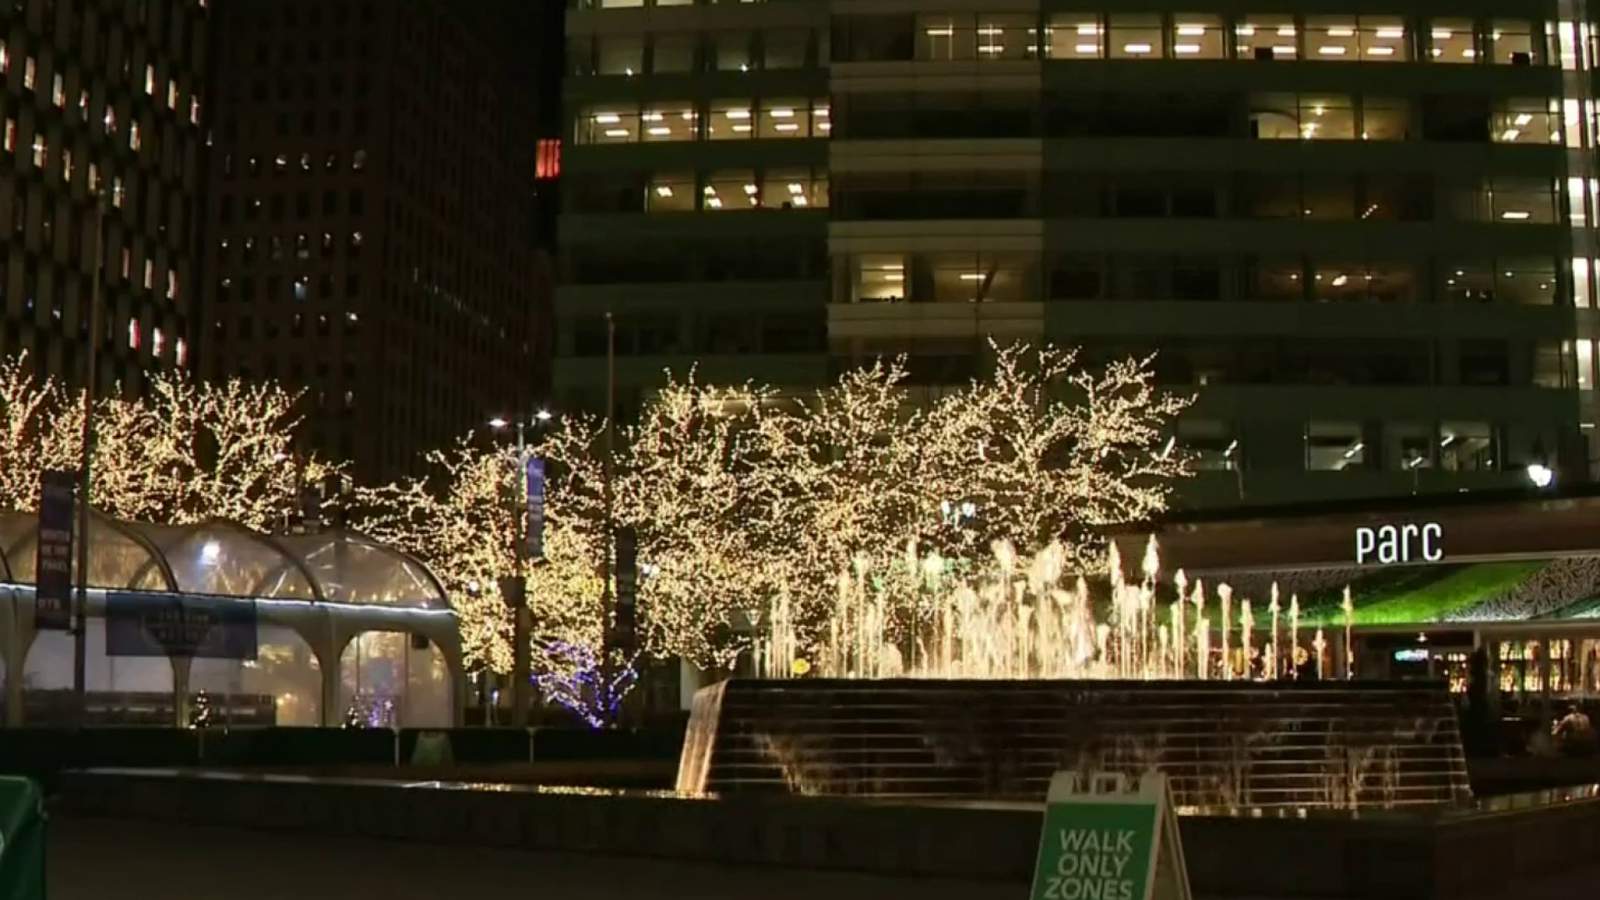 Campus Martius in Detroit named one of the best public squares in the country